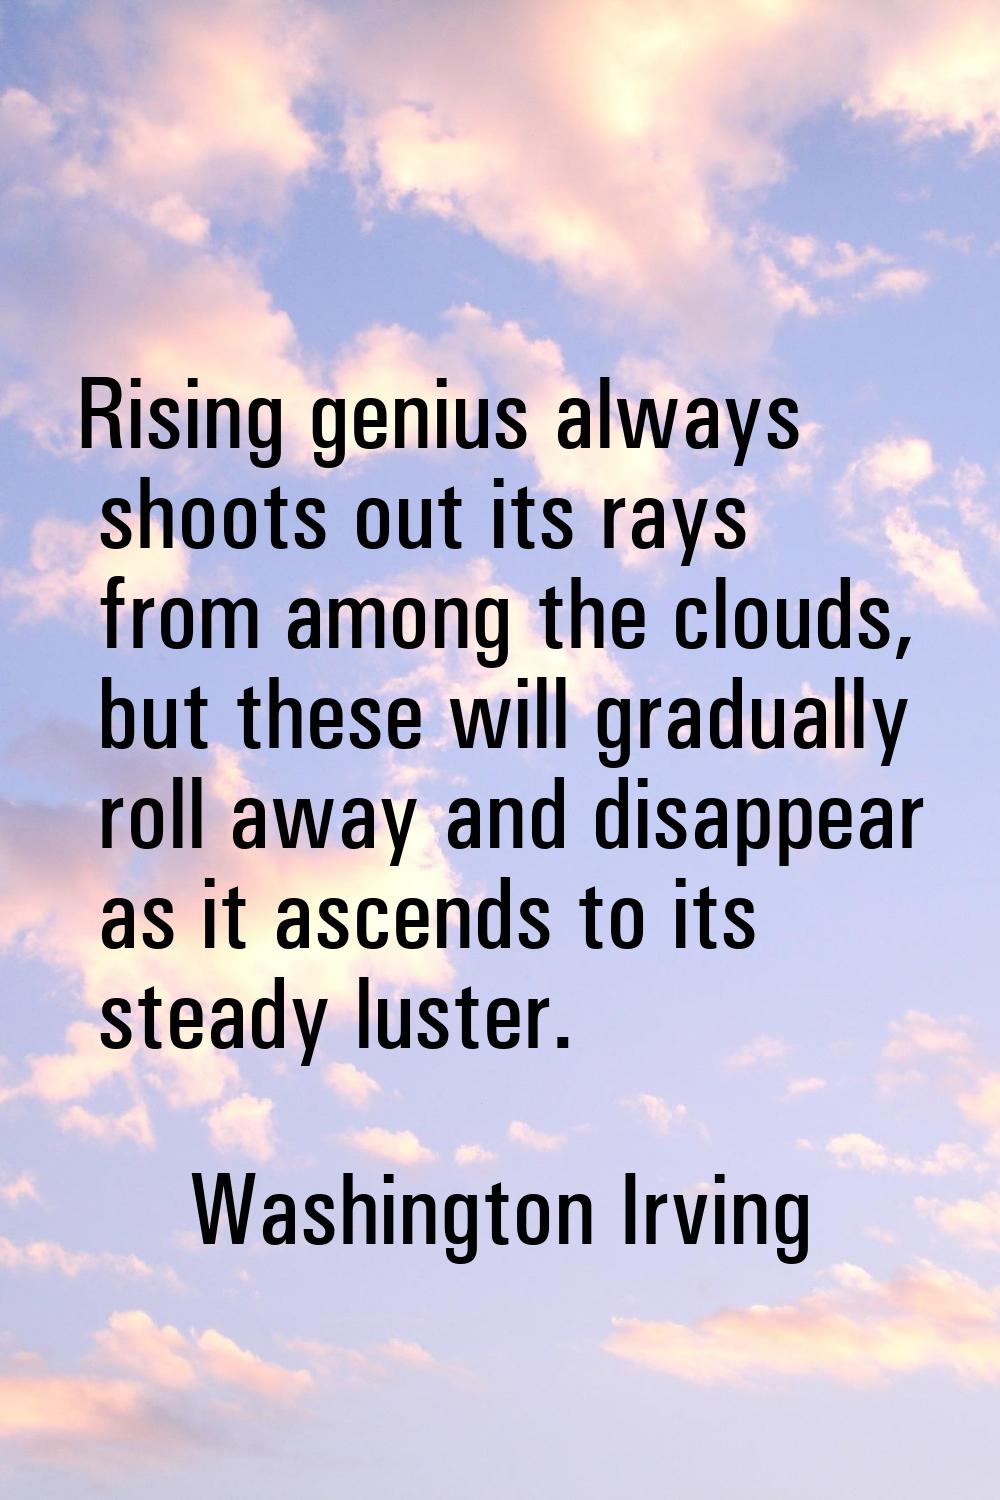 Rising genius always shoots out its rays from among the clouds, but these will gradually roll away 